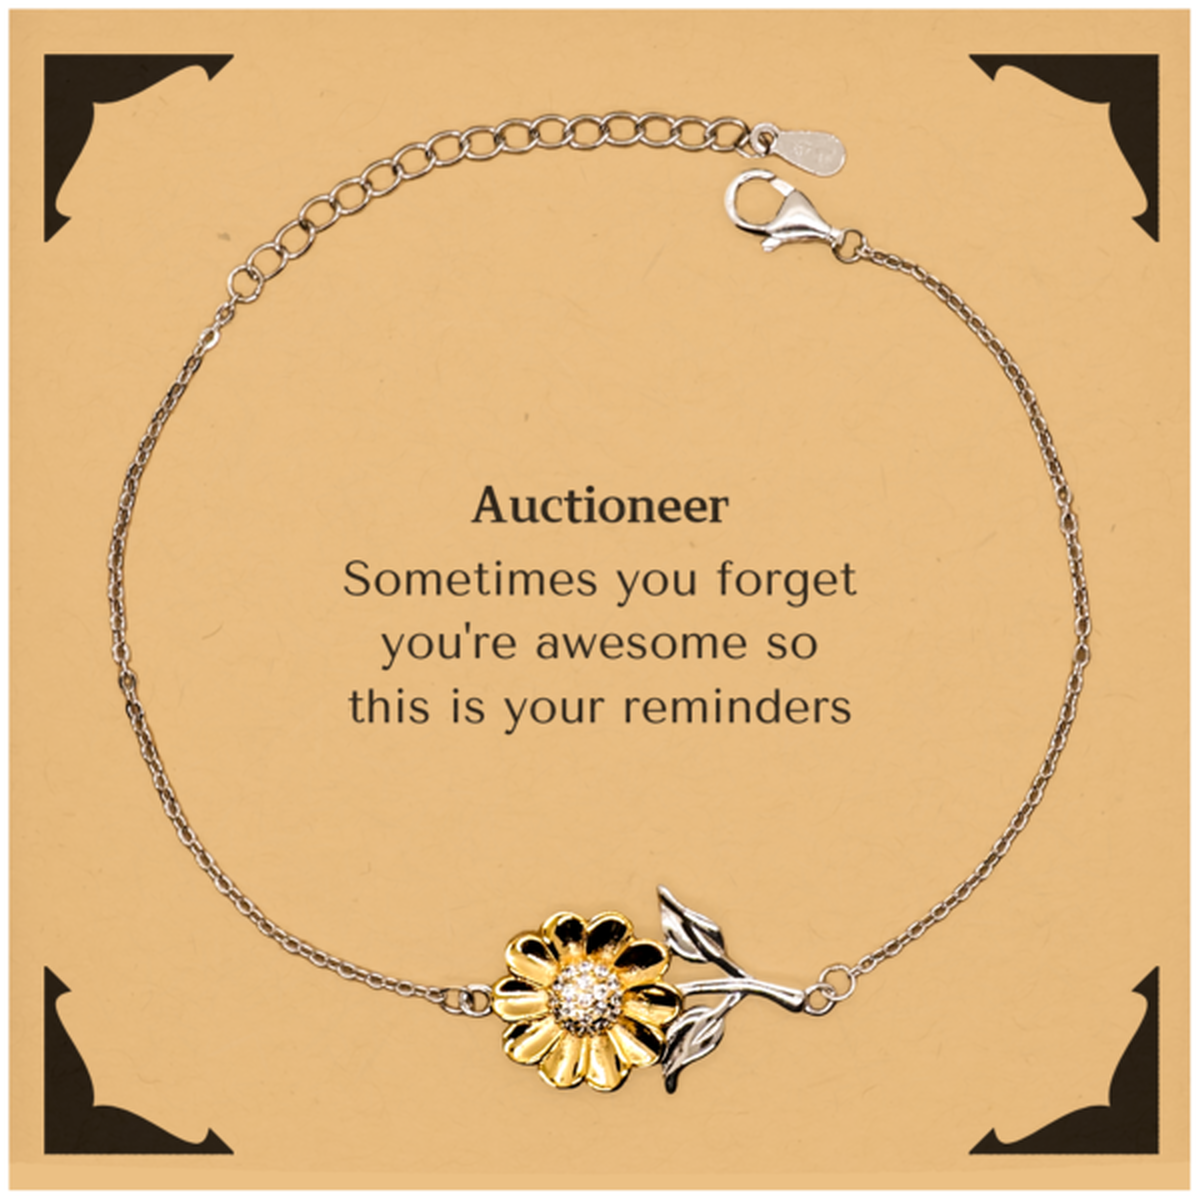 Sentimental Auctioneer Sunflower Bracelet, Auctioneer Sometimes you forget you're awesome so this is your reminders, Graduation Christmas Birthday Gifts for Auctioneer, Men, Women, Coworkers